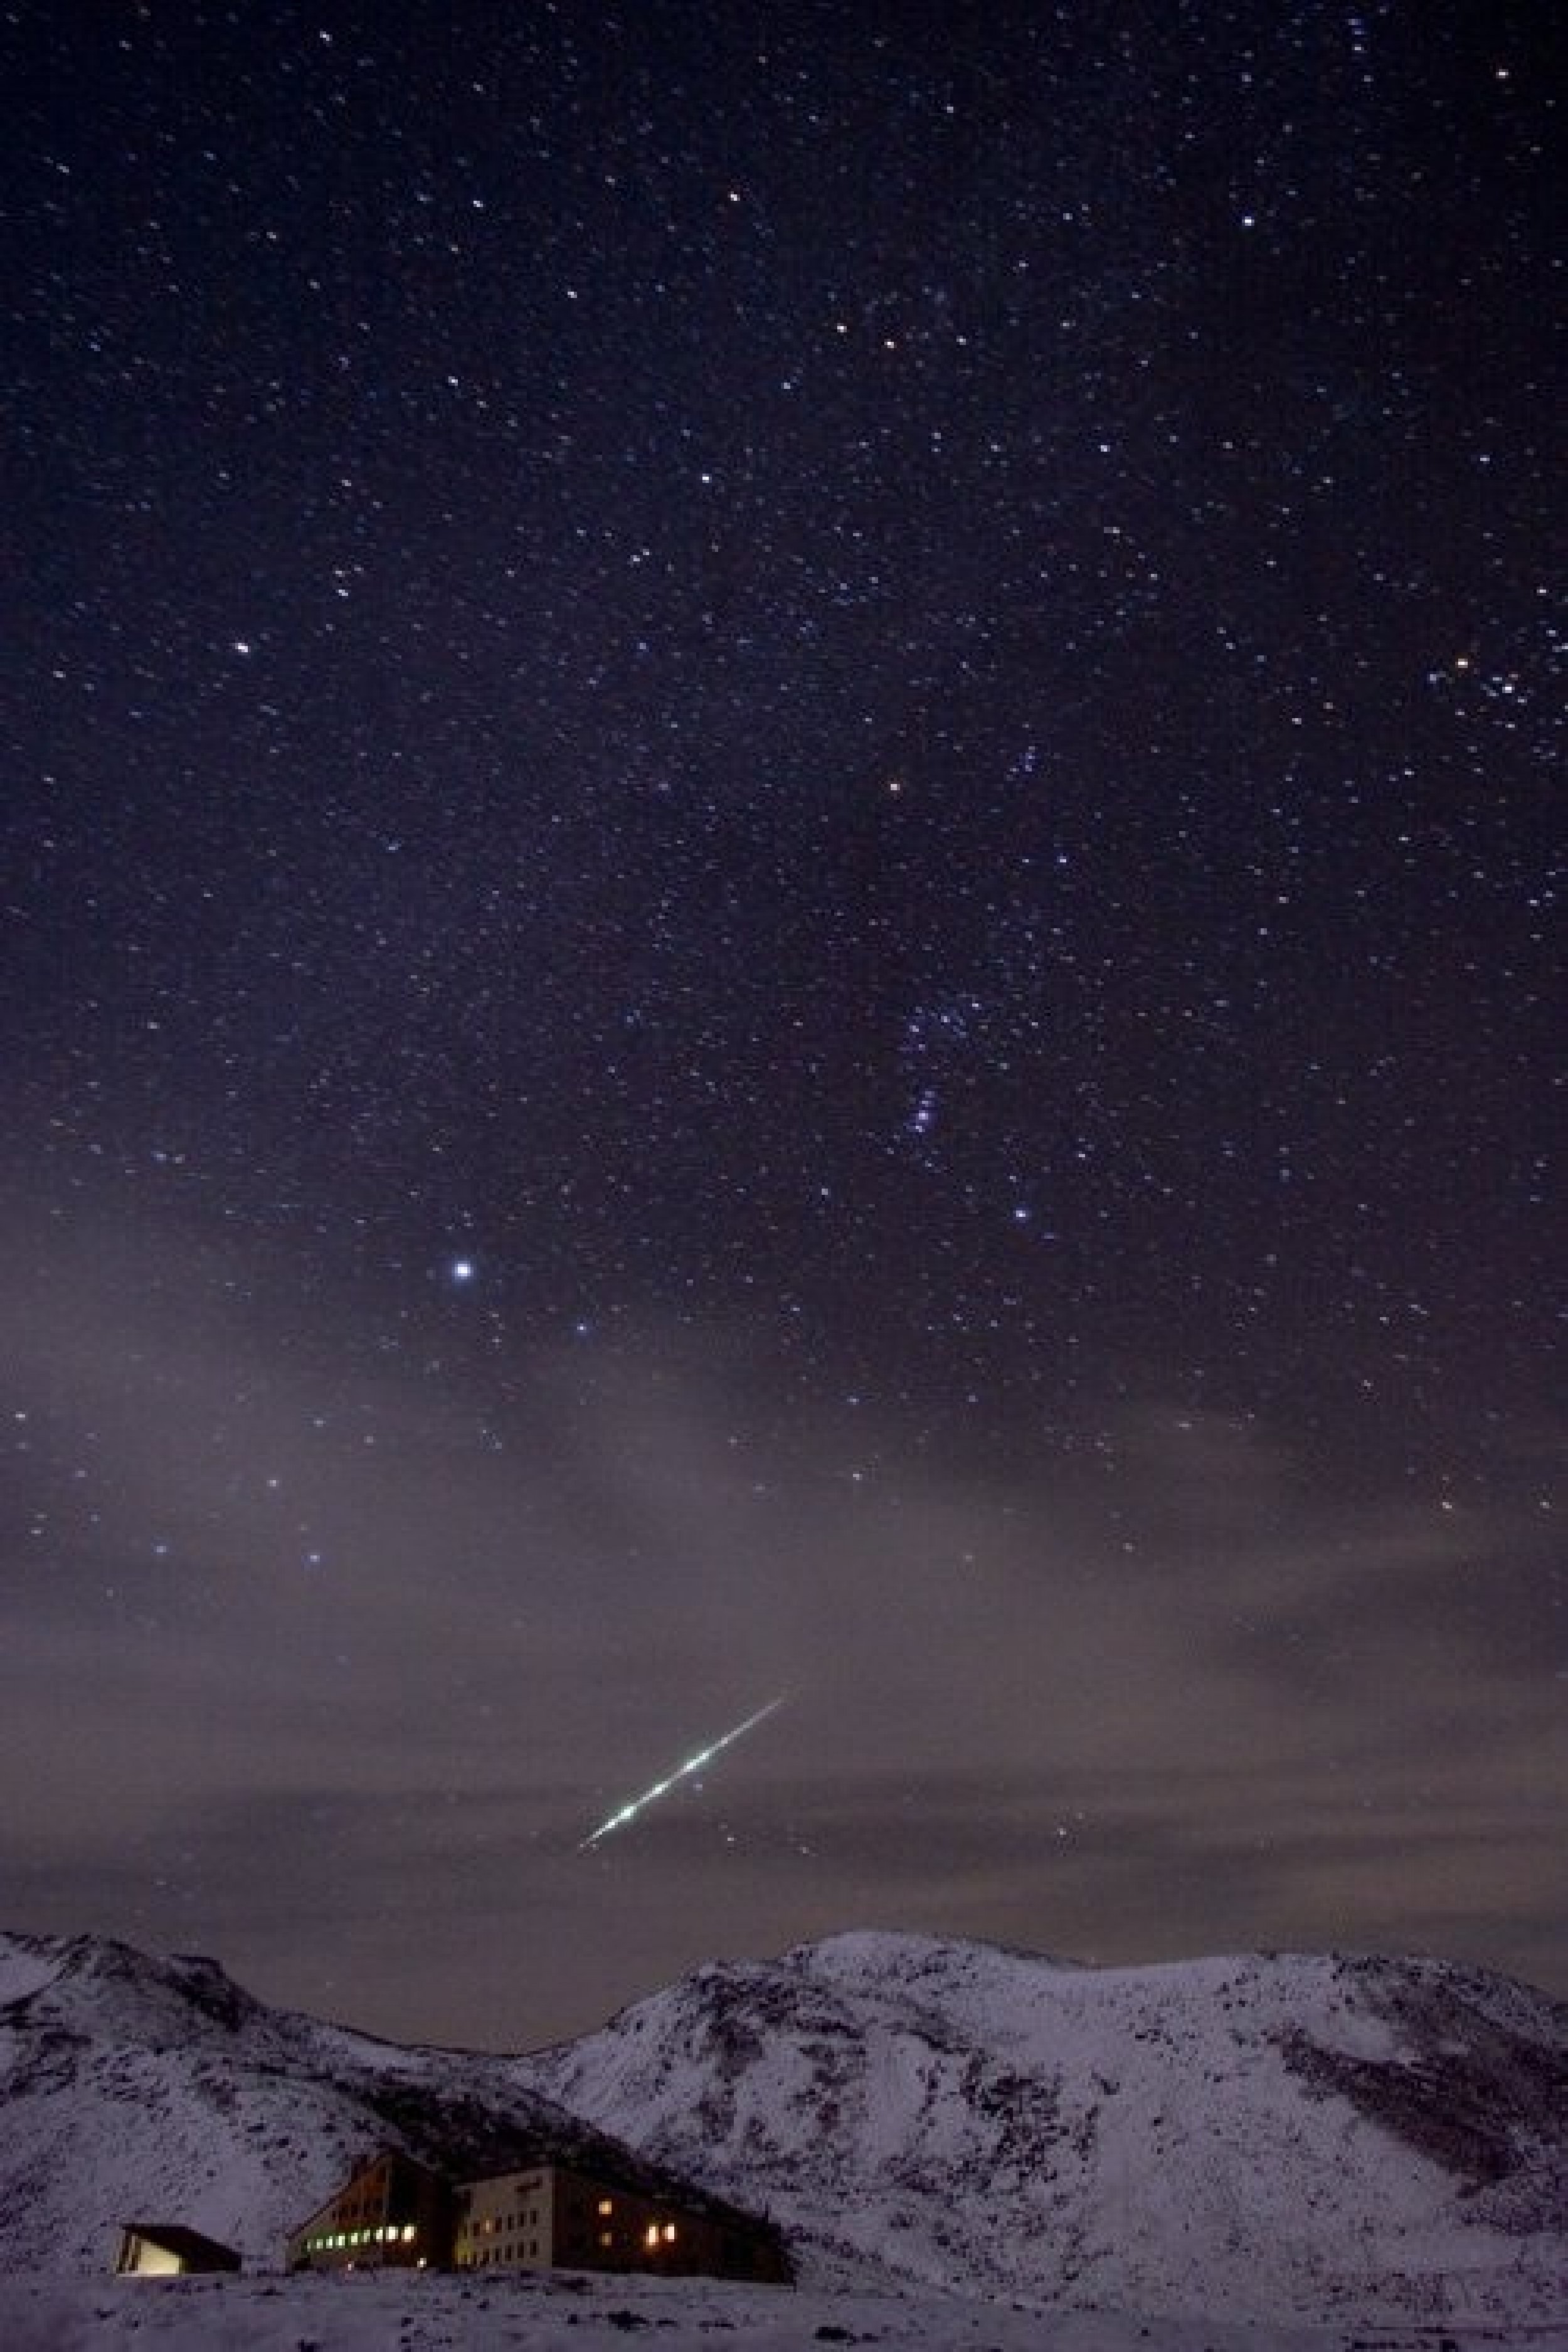 Taurid Fireball Photographed in 2005